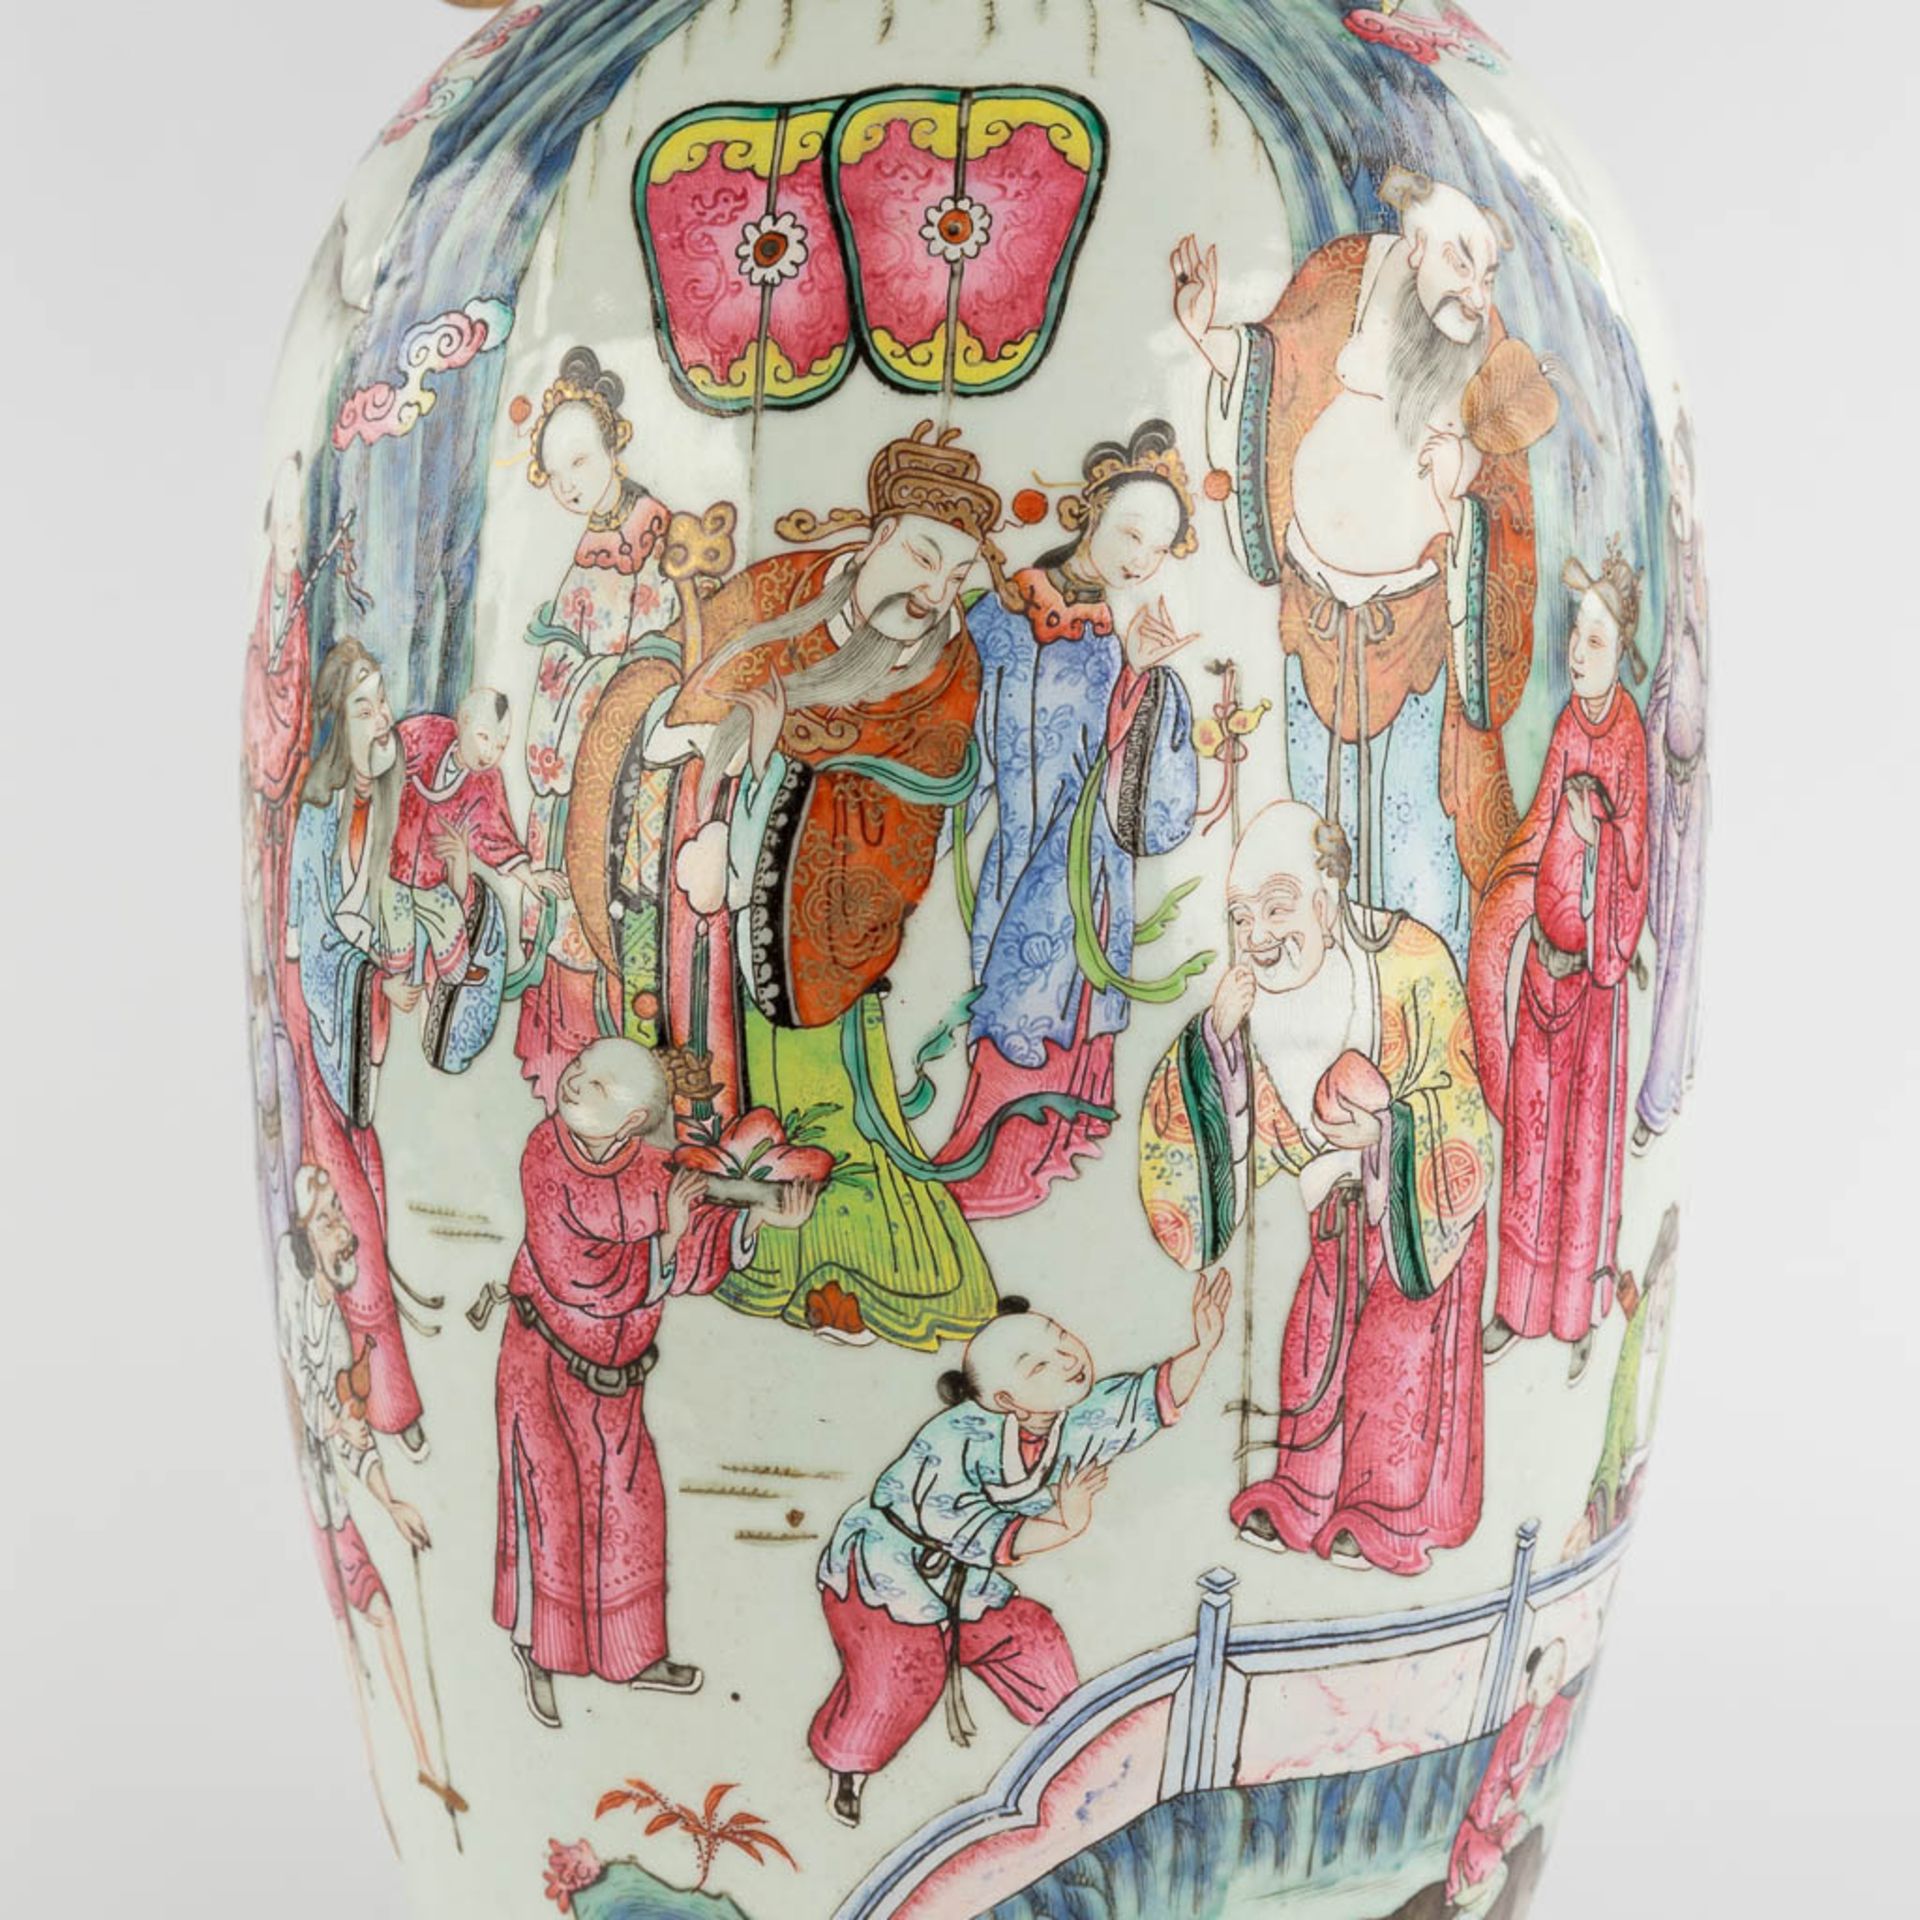 A Chinese Famille Rose vase, decorated with Wise men and items of good fortune. 19th C. (H:60 x D:25 - Image 12 of 18